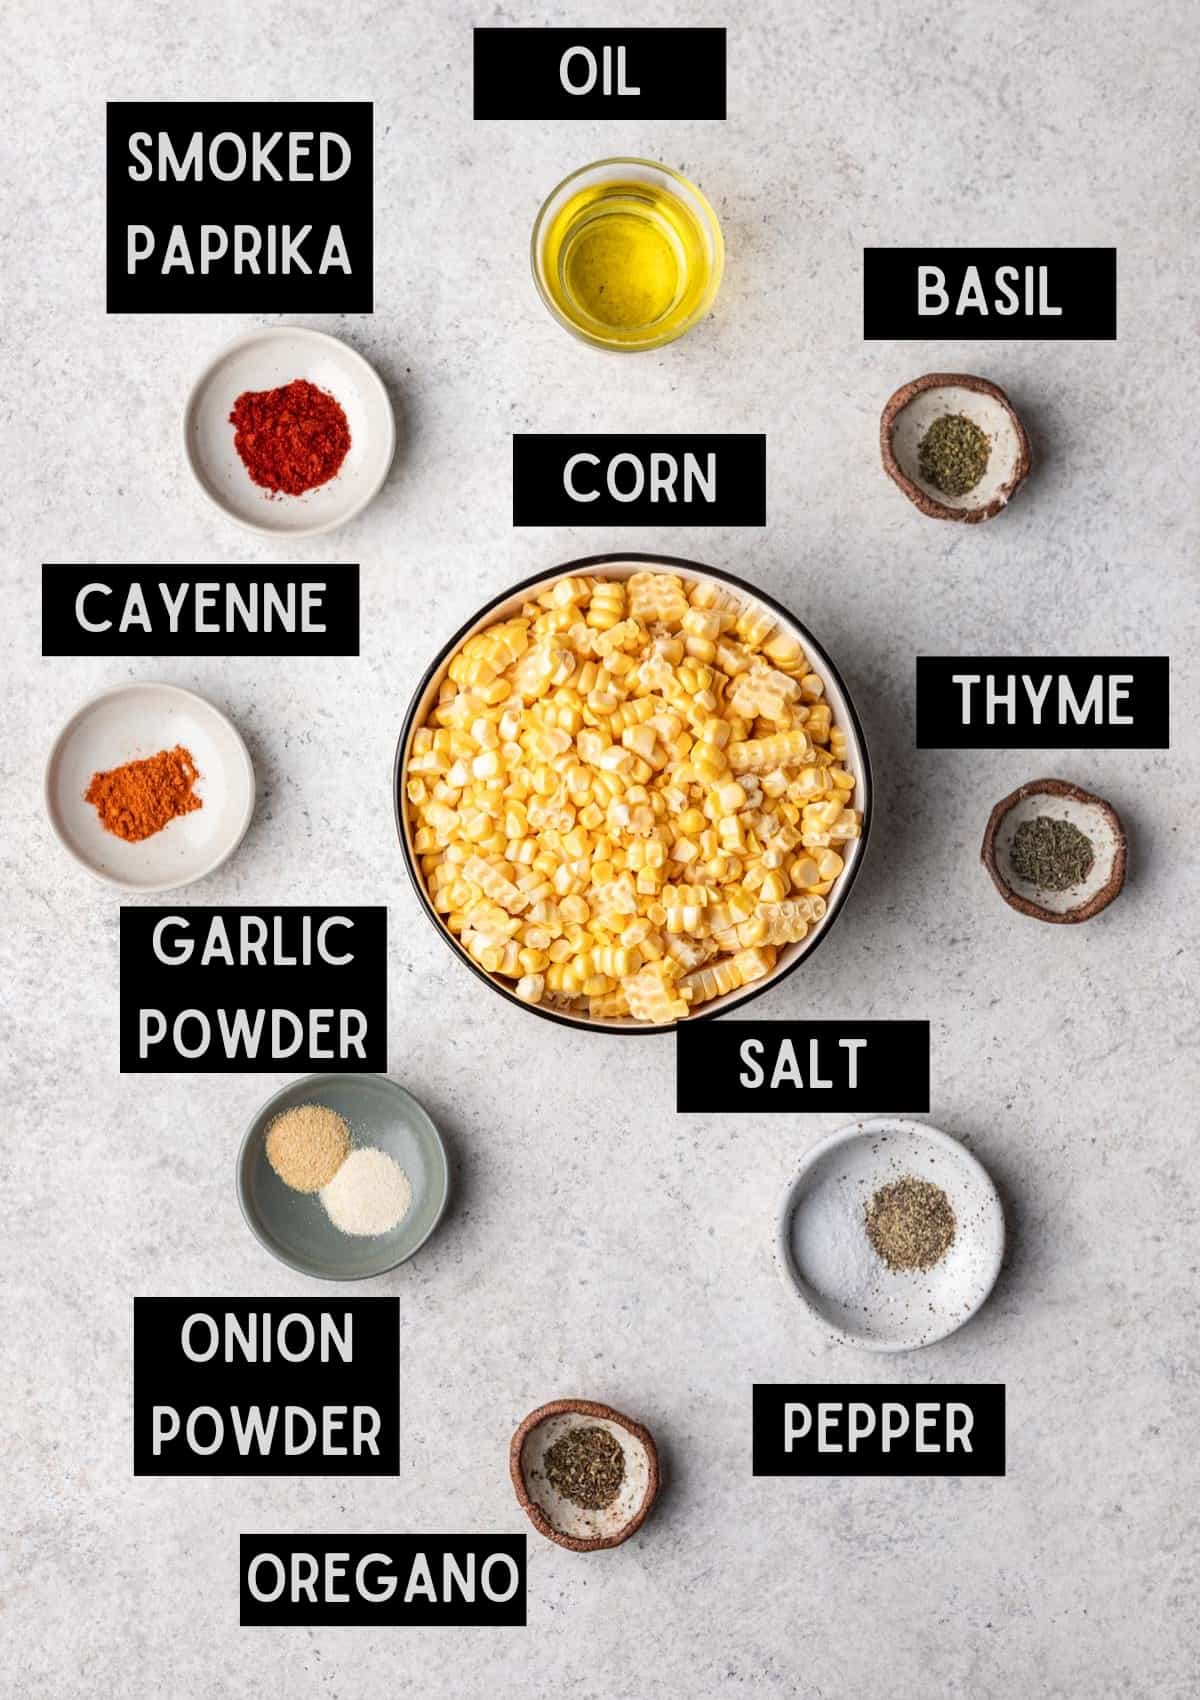 Labelled ingredients for blackened corn (see recipe for details).